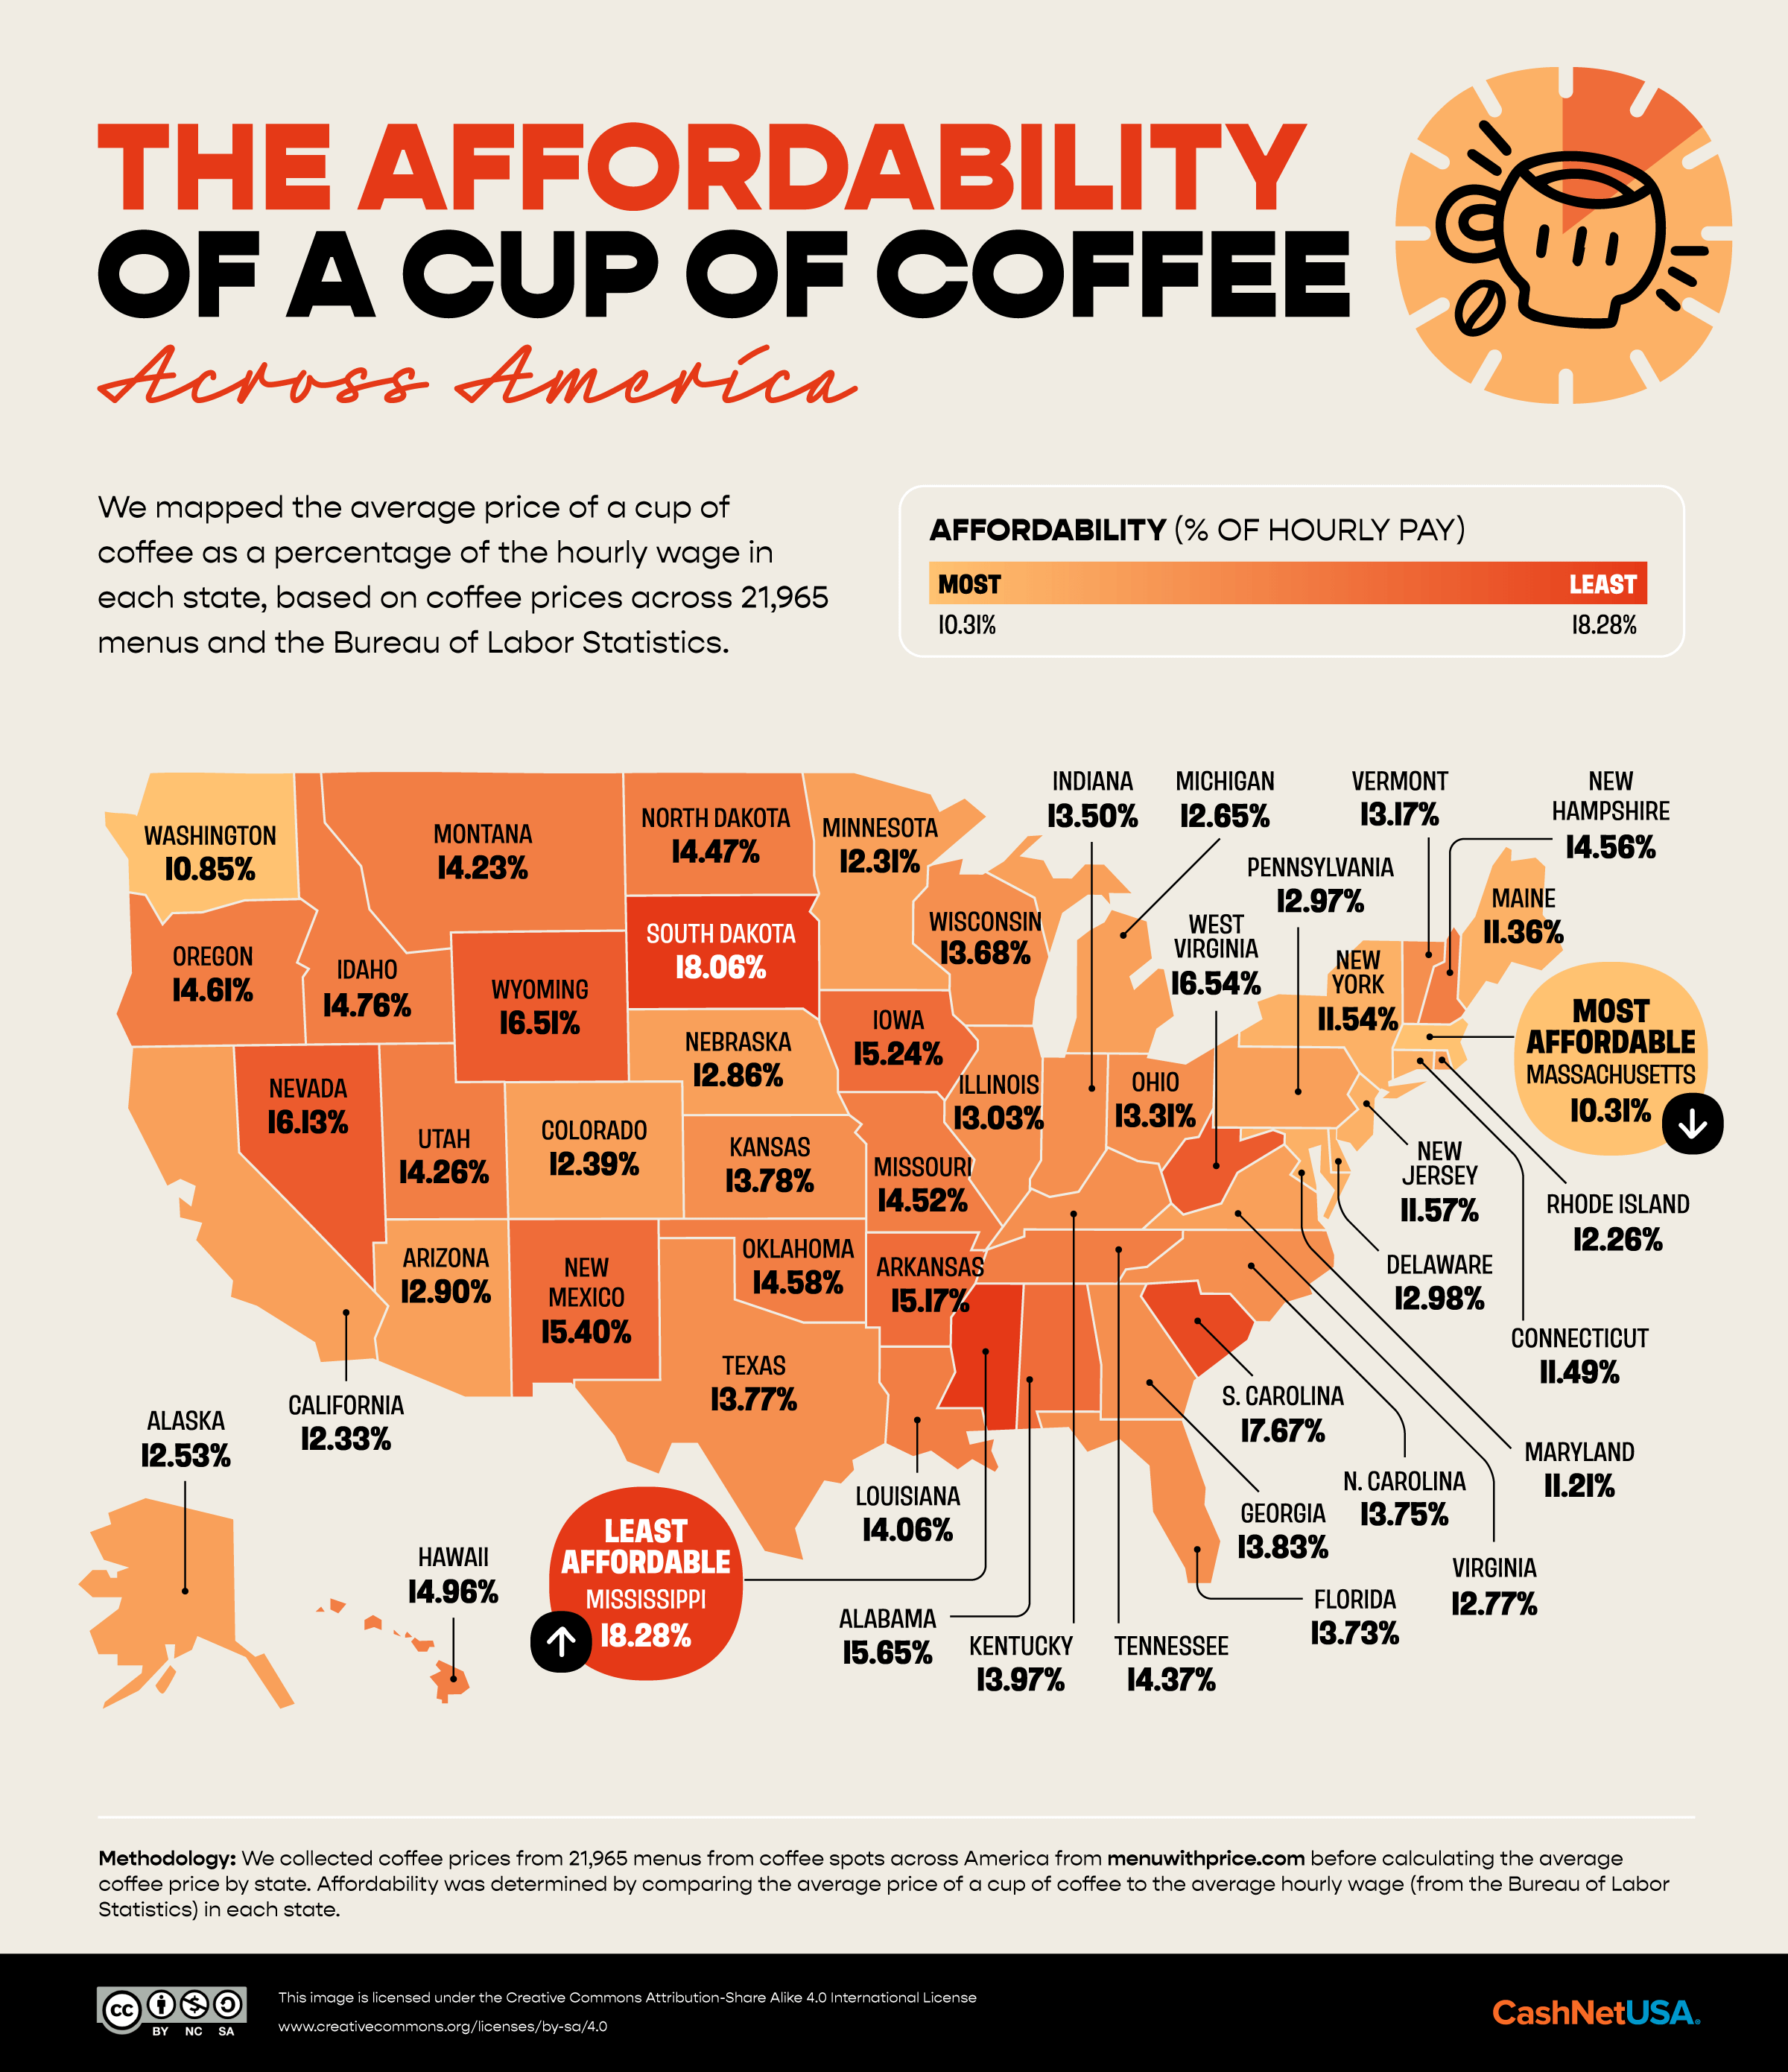 U.S. map showing the affordability of coffee in every state compared to income